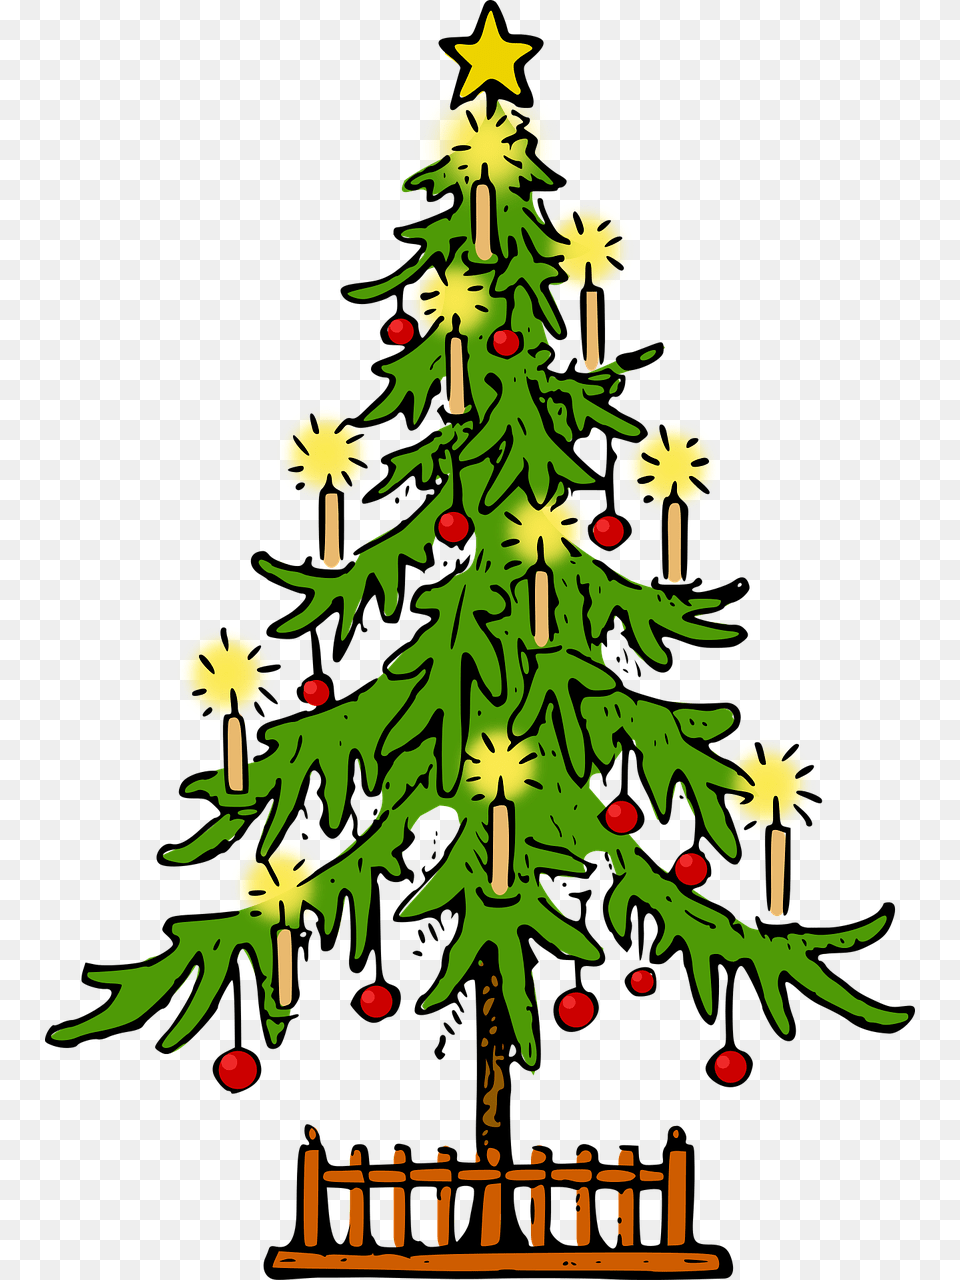 All Photo Clipart Happy Christmas In Spanish, Plant, Tree, Christmas Decorations, Festival Free Png